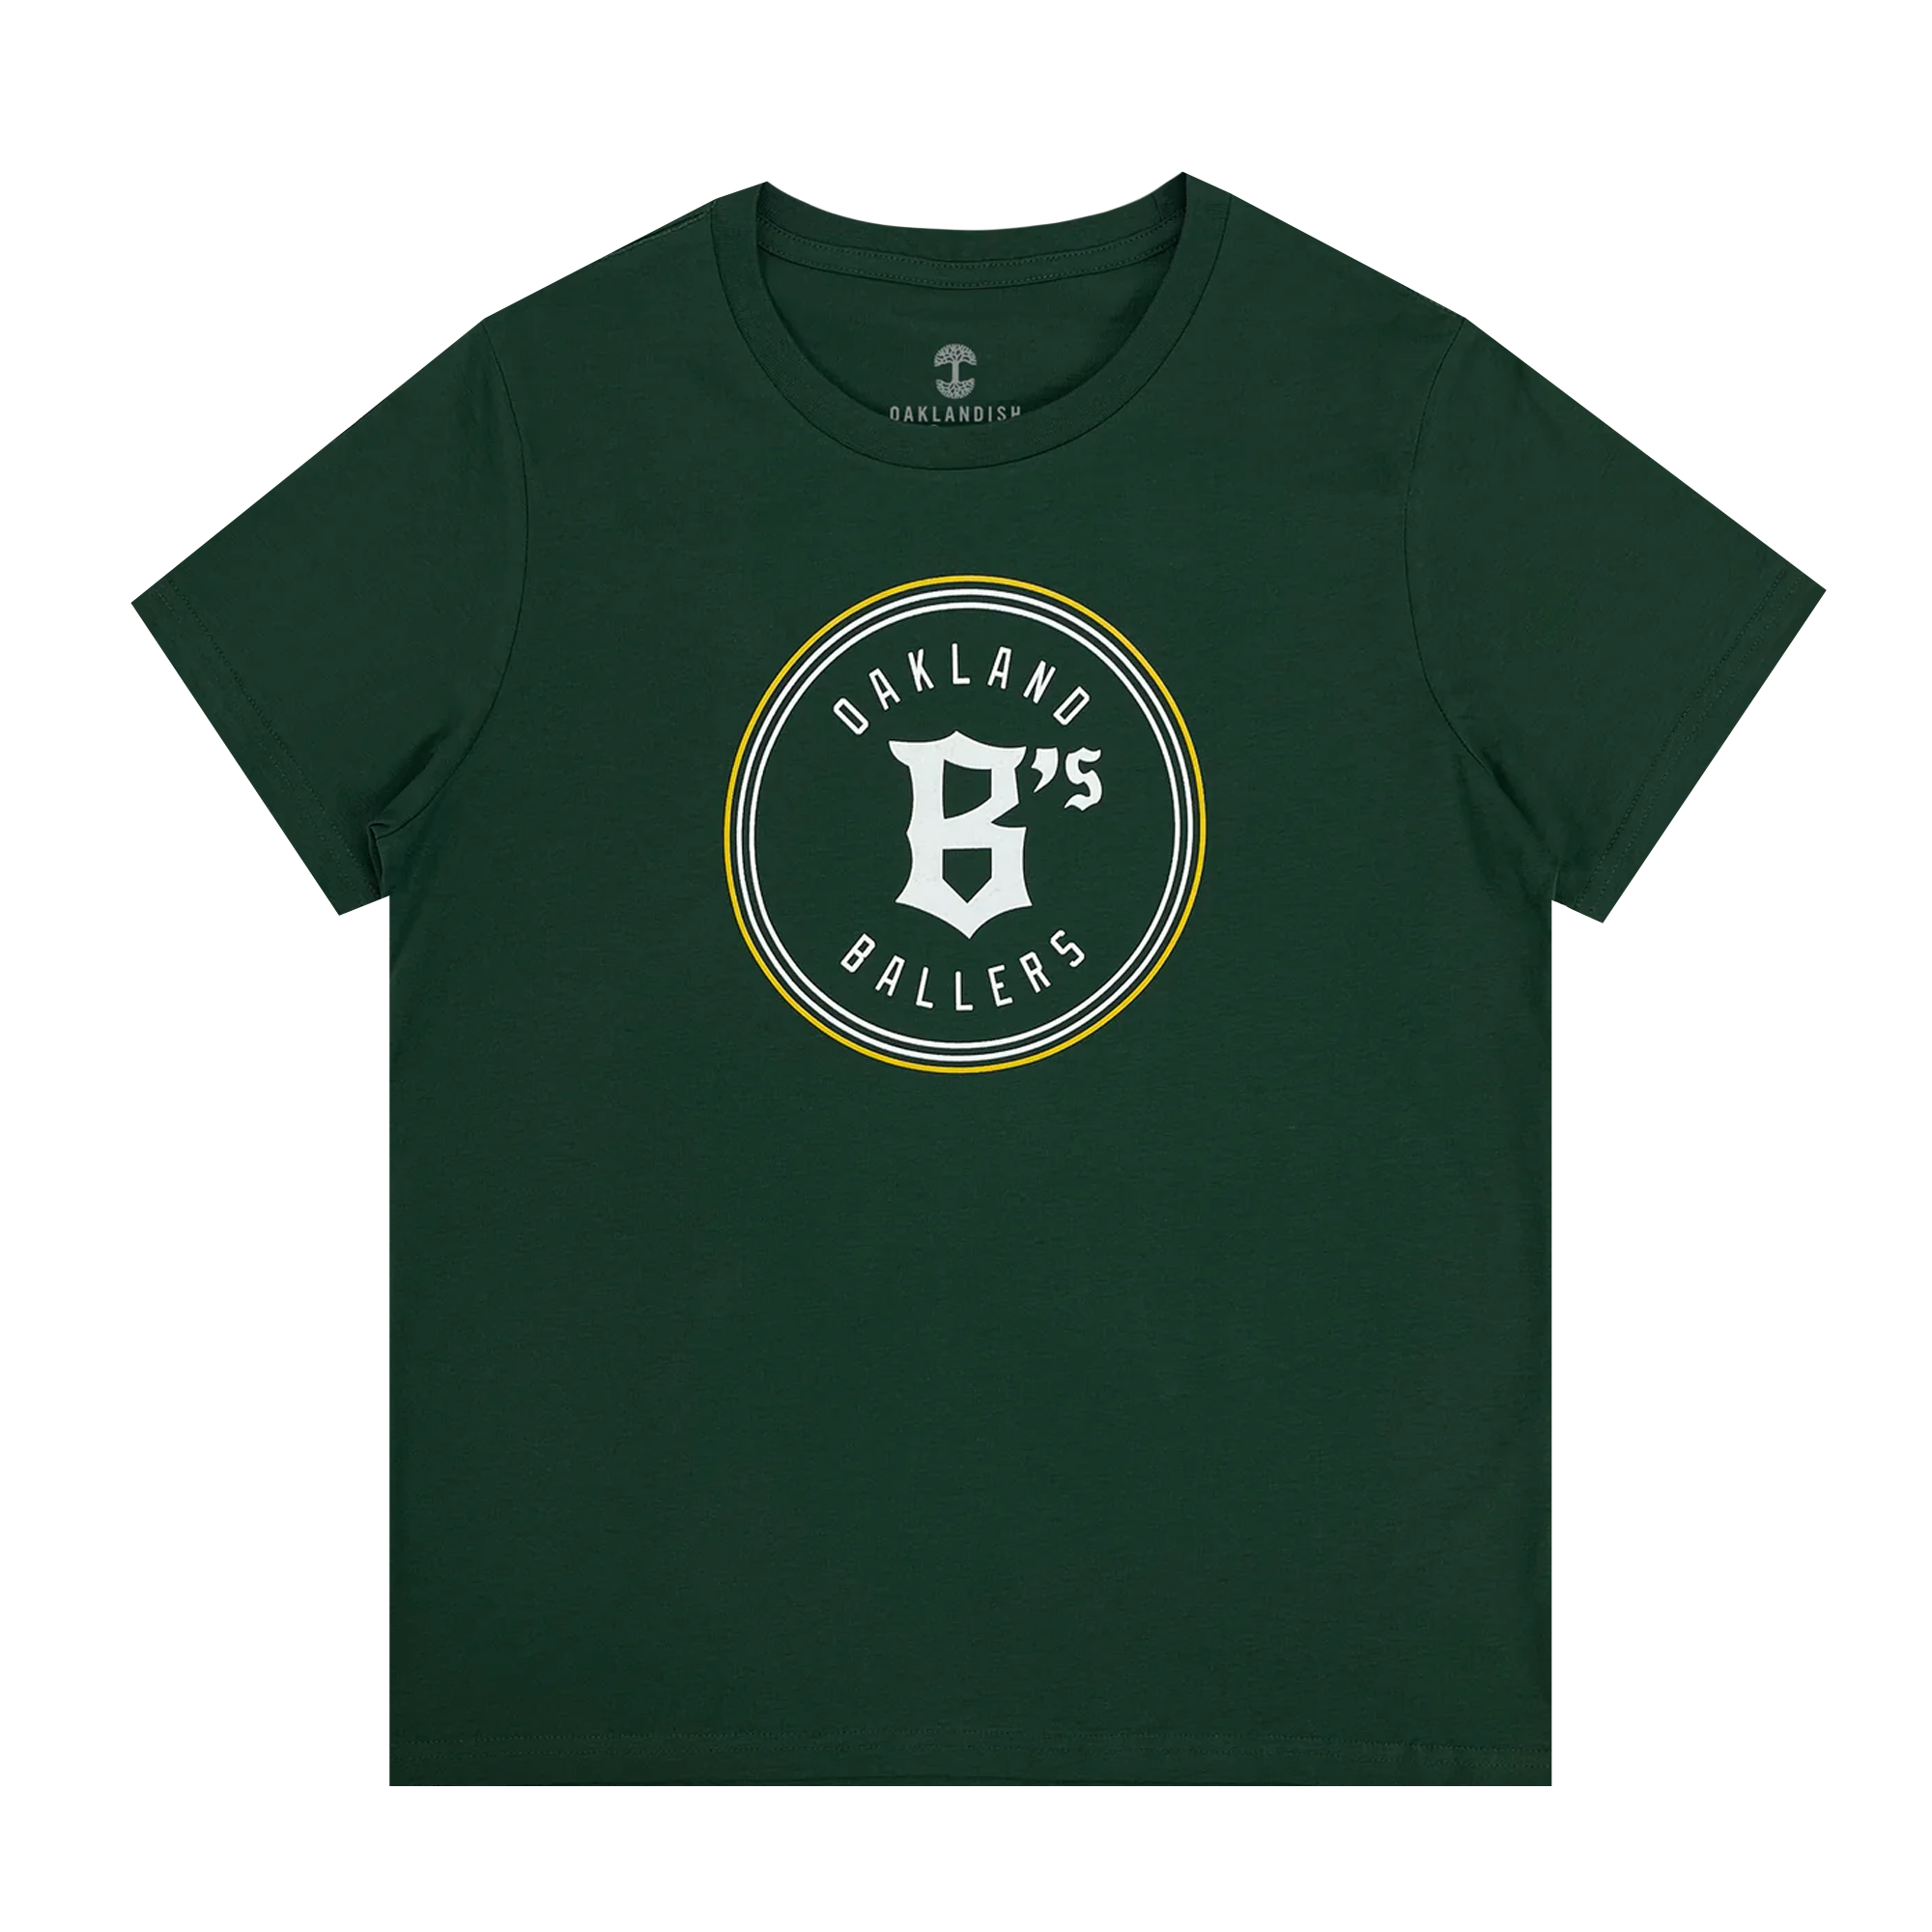 Front view of a women’s green t-shirt with a large round white and gold Oakland Ballers logo and wordmark on center chest.